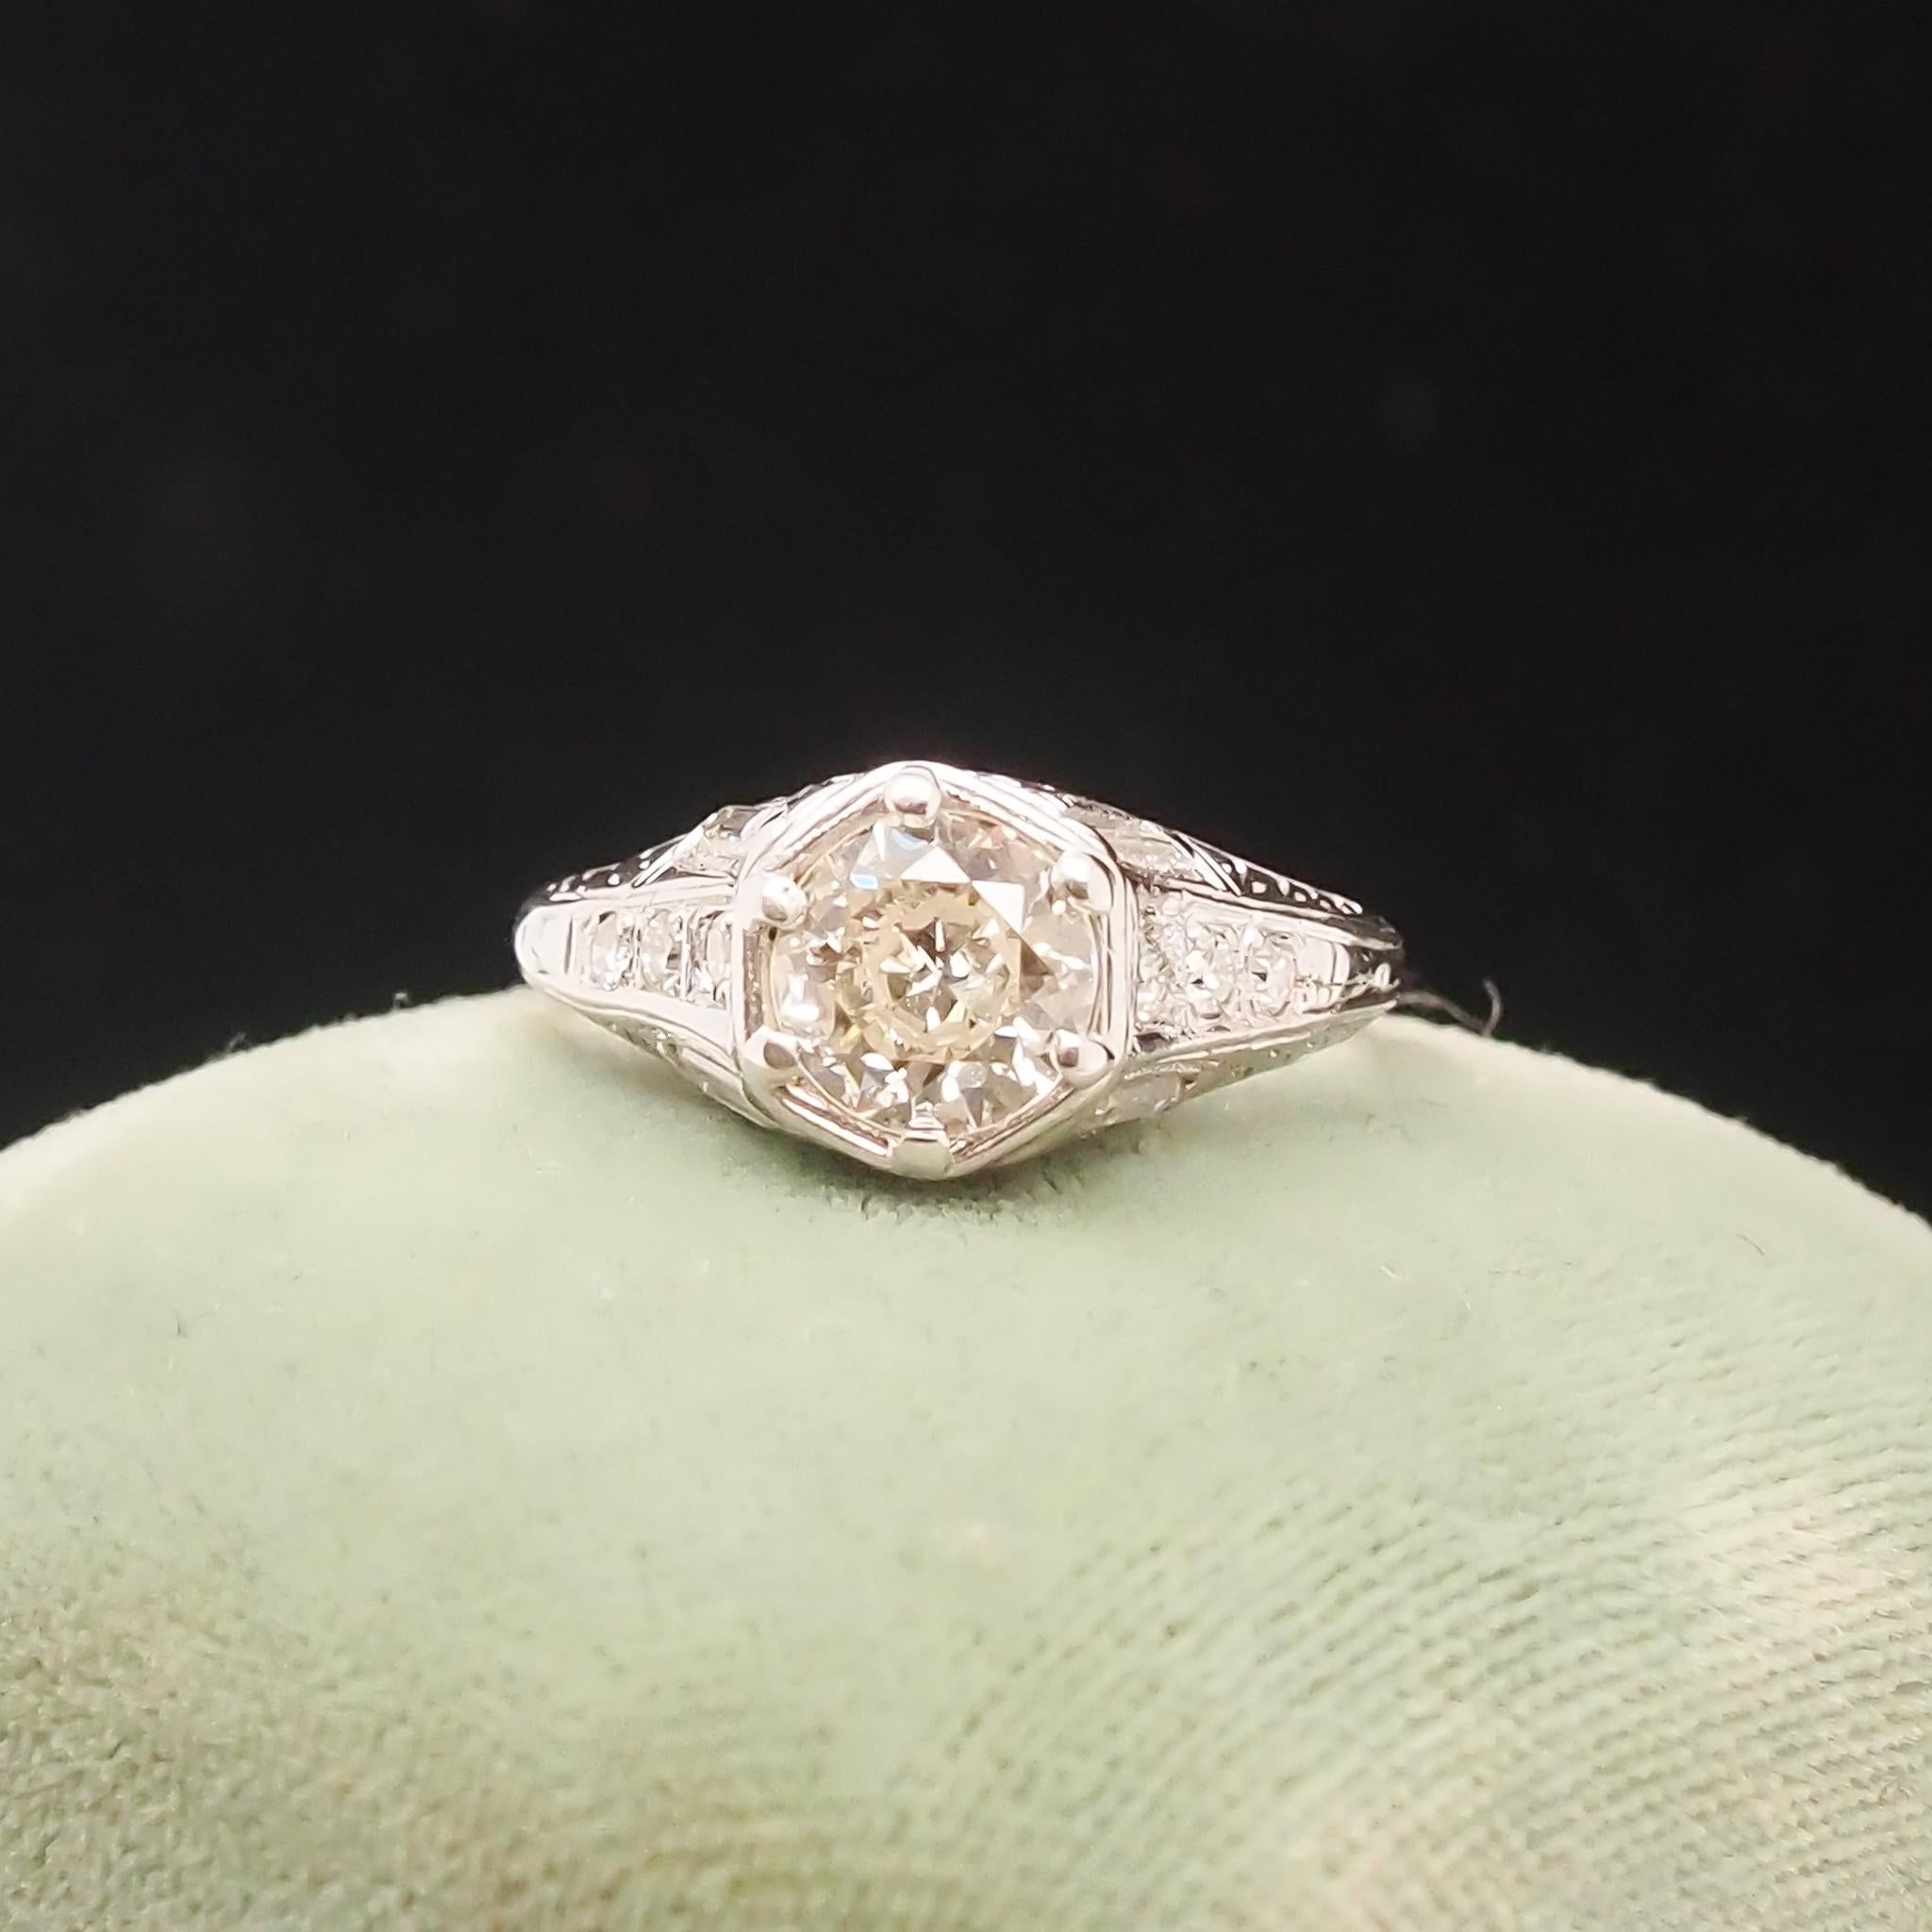 Year: 1920s
Item Details:
Ring Size: 5 (Sizable)
Metal Type: Platinum [Hallmarked, and Tested]
Weight: 3.1 grams
Center Diamond Details: .90ct, Old European Brilliant, L Color, VS Clarity, Natural Diamond
Side Diamond Details: .20ct total weight,